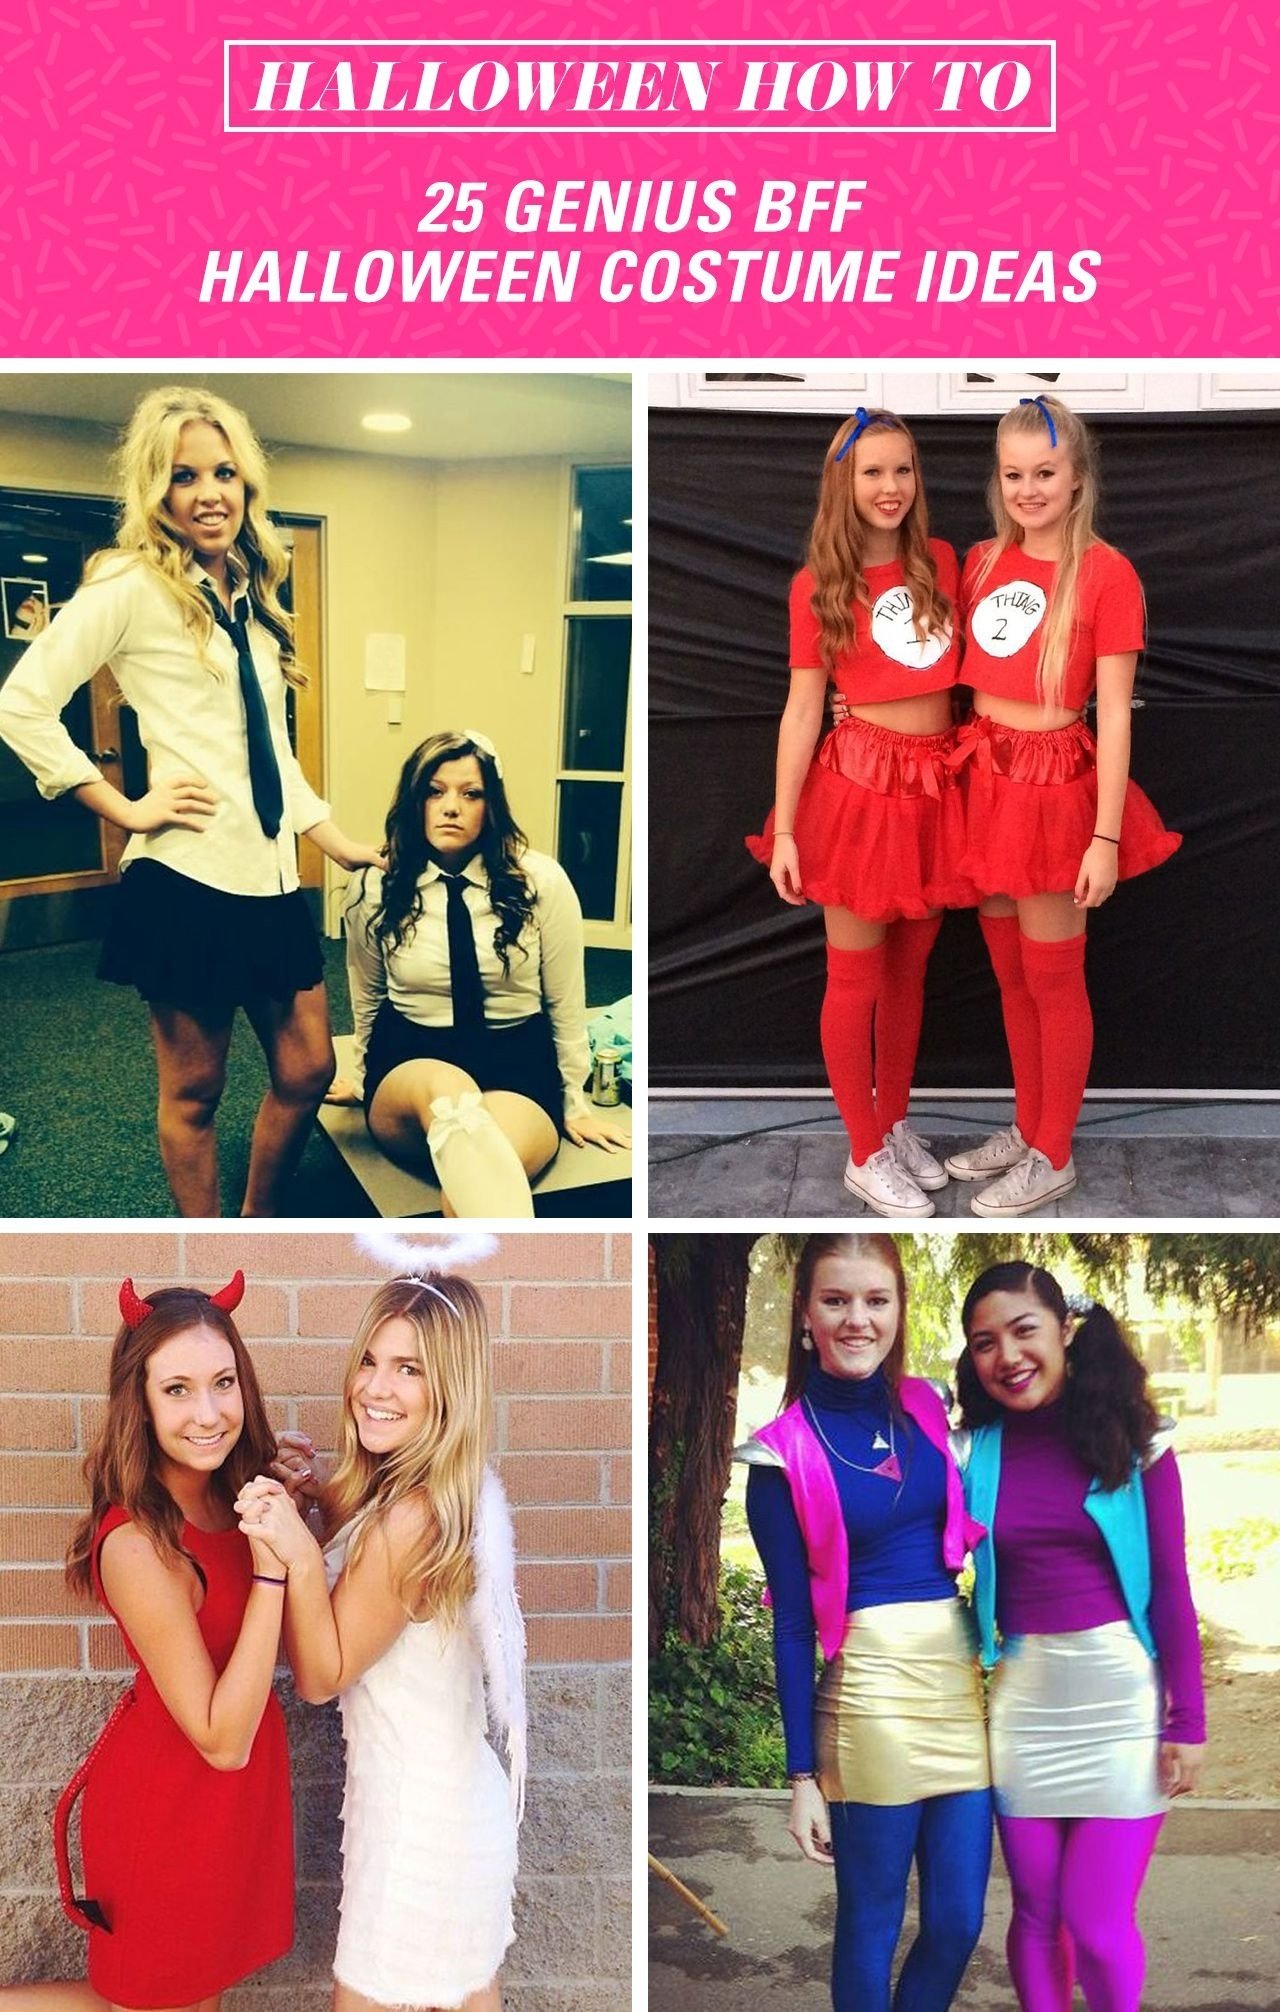 10 Perfect Two Person Halloween Costume Ideas 24 genius bff halloween costume ideas you need to try costumes 2023